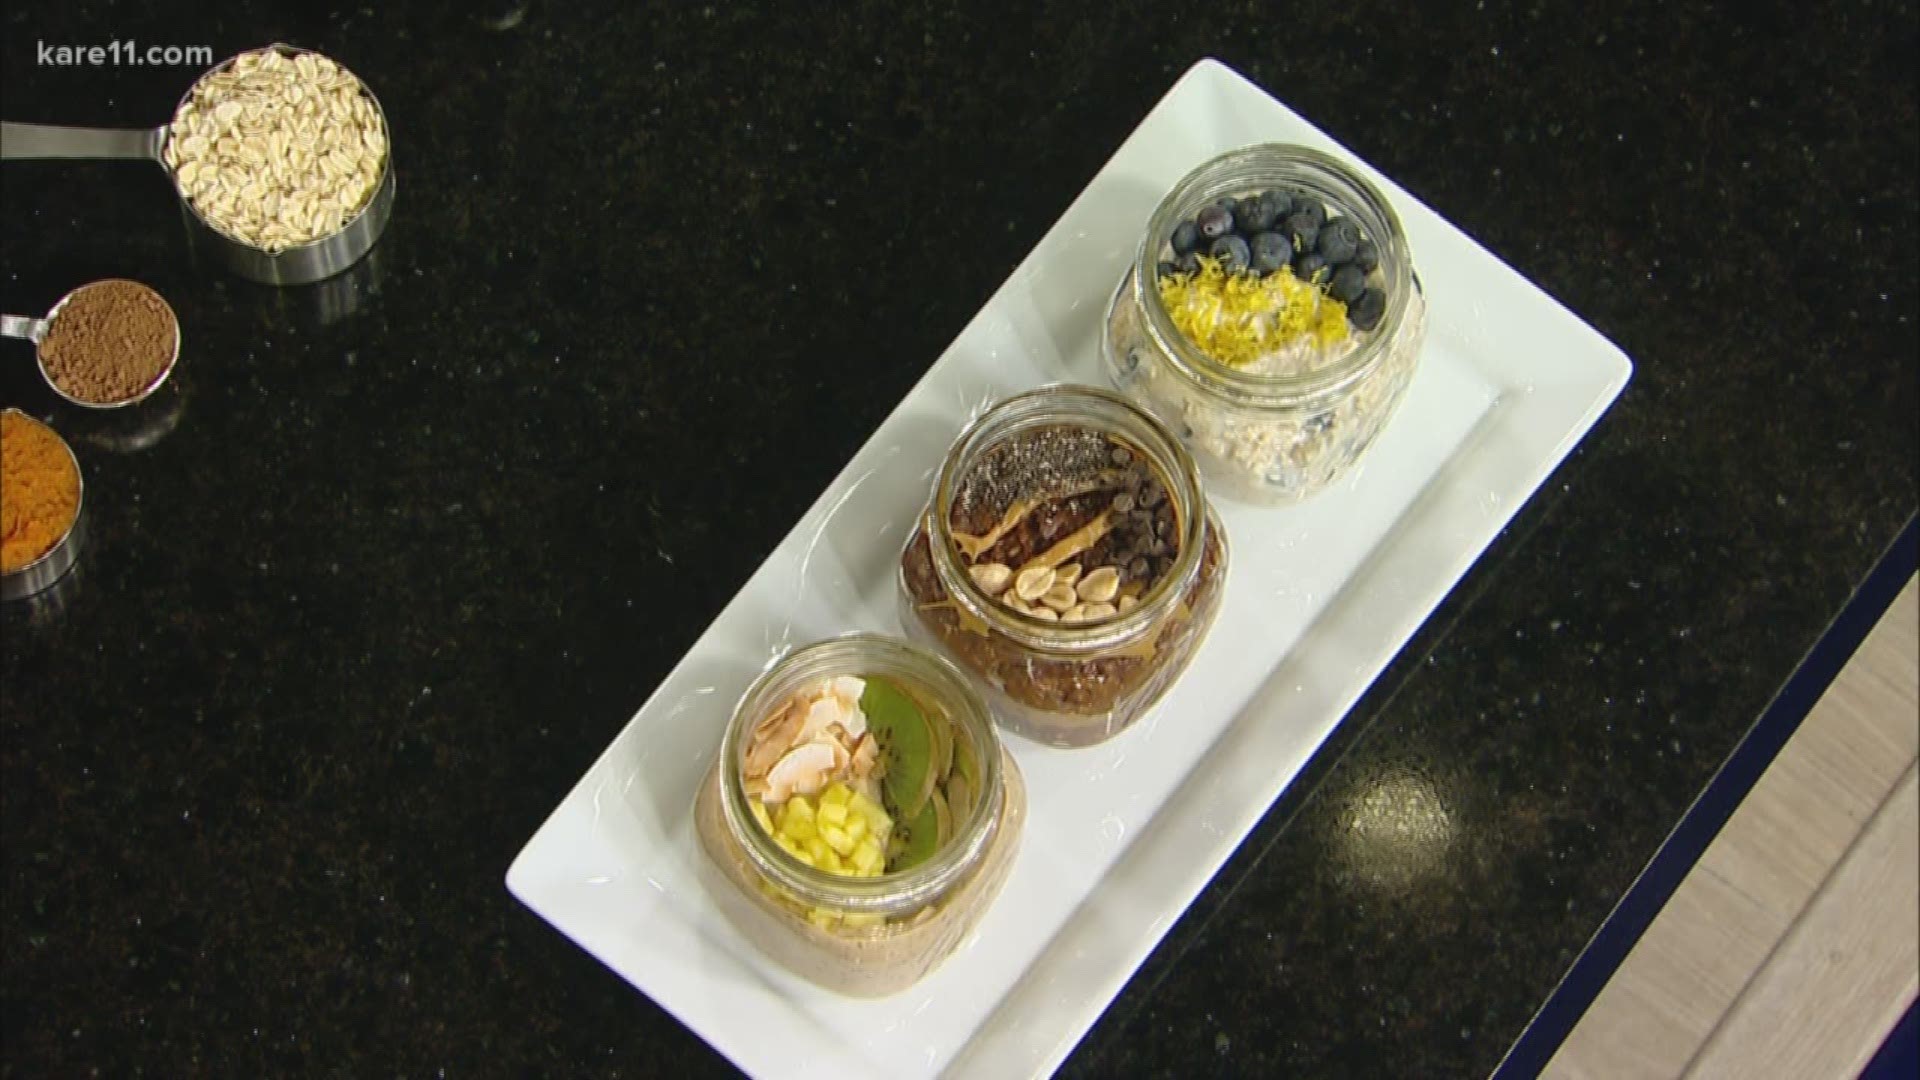 Melissa Jeager from Hy-Vee serves up the inside scoop on some recipes for heart healthy oatmeal on-the-go.